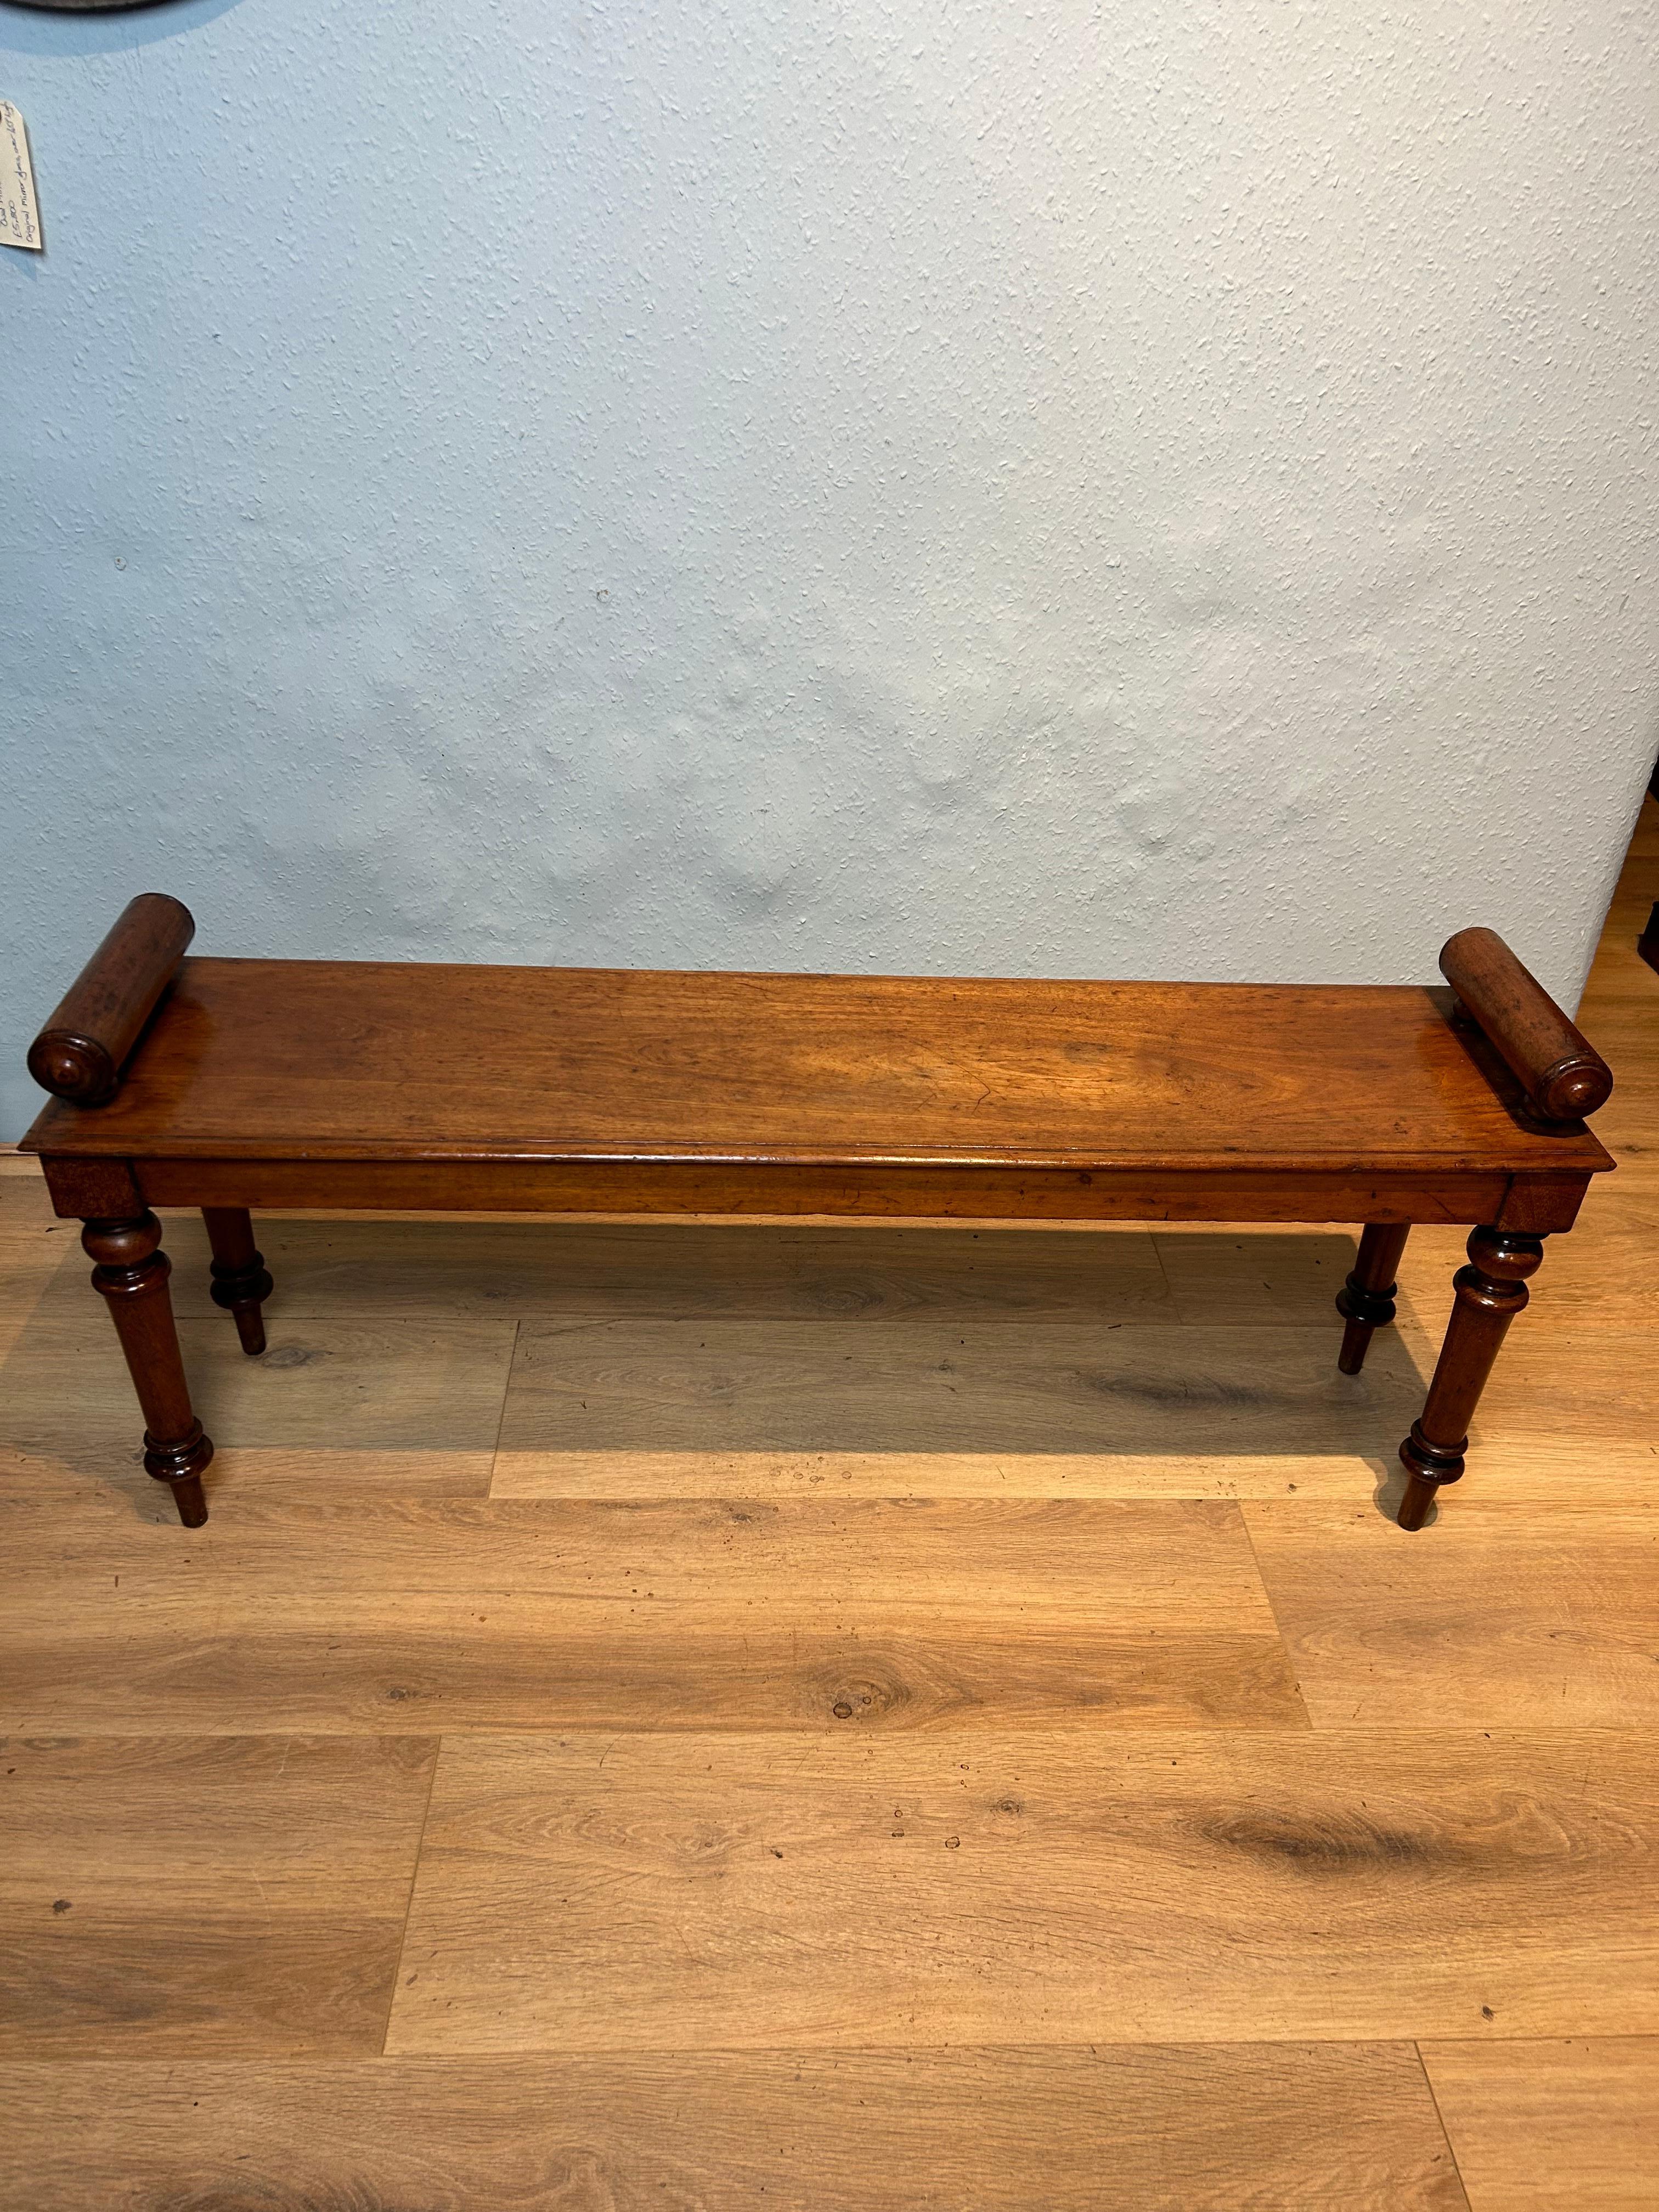 19th century mahogany hall bench circa 1850 with bold turned raised bolster ends resting on a light honey coloured thumb moulded seAt, seating on elegant finely tuned legs, retaining original patina,the underside is supported with a central rail